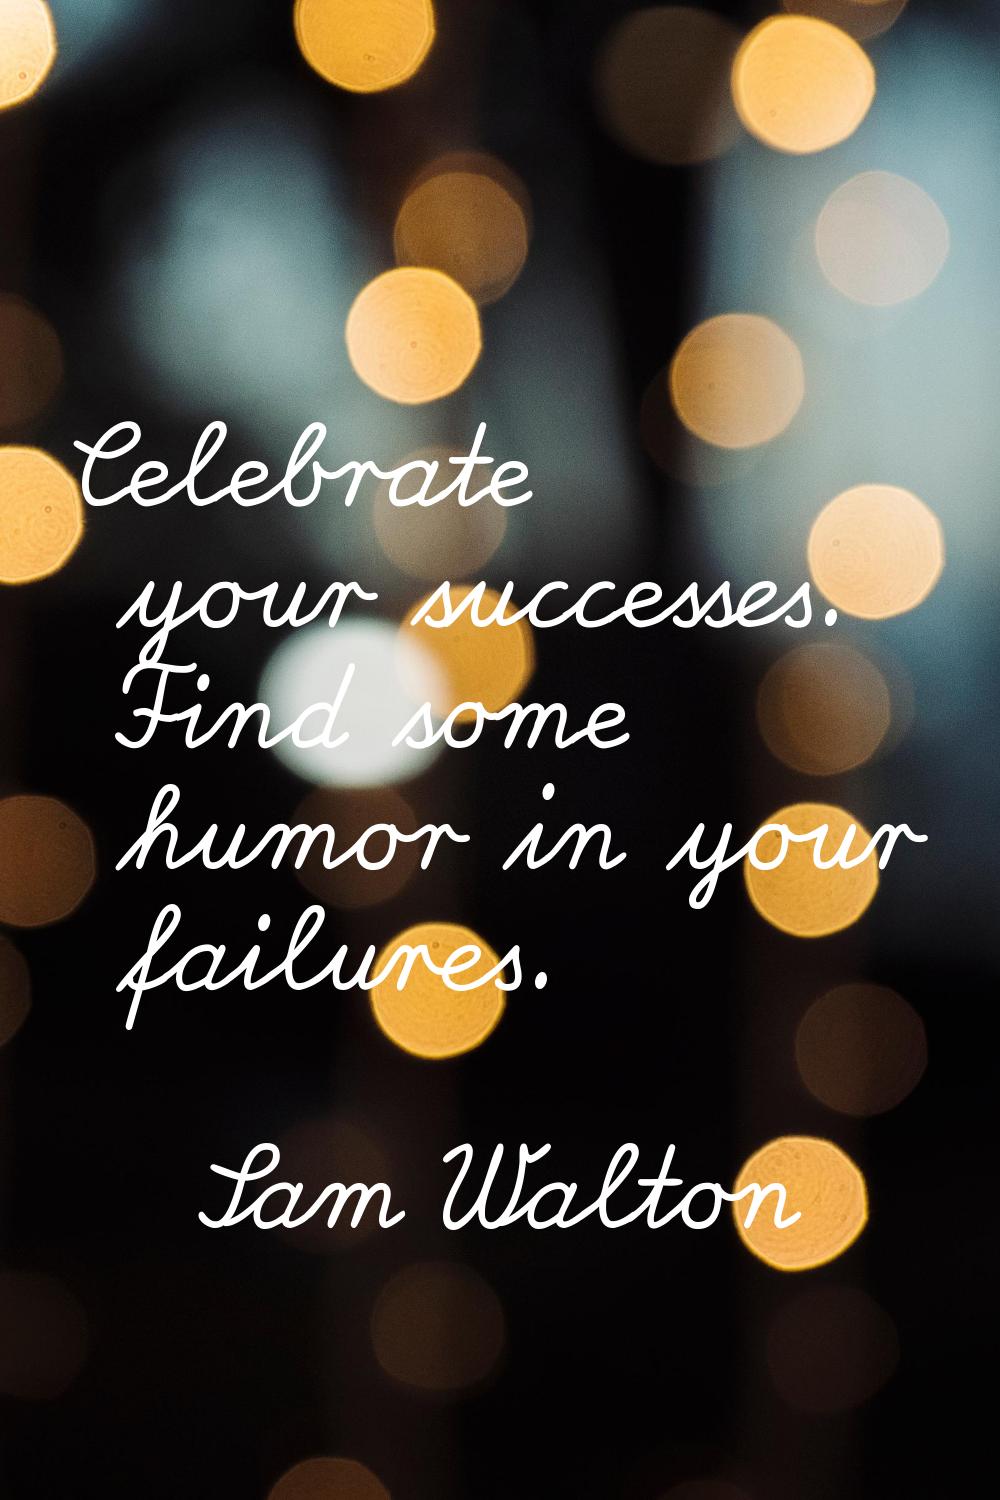 Celebrate your successes. Find some humor in your failures.